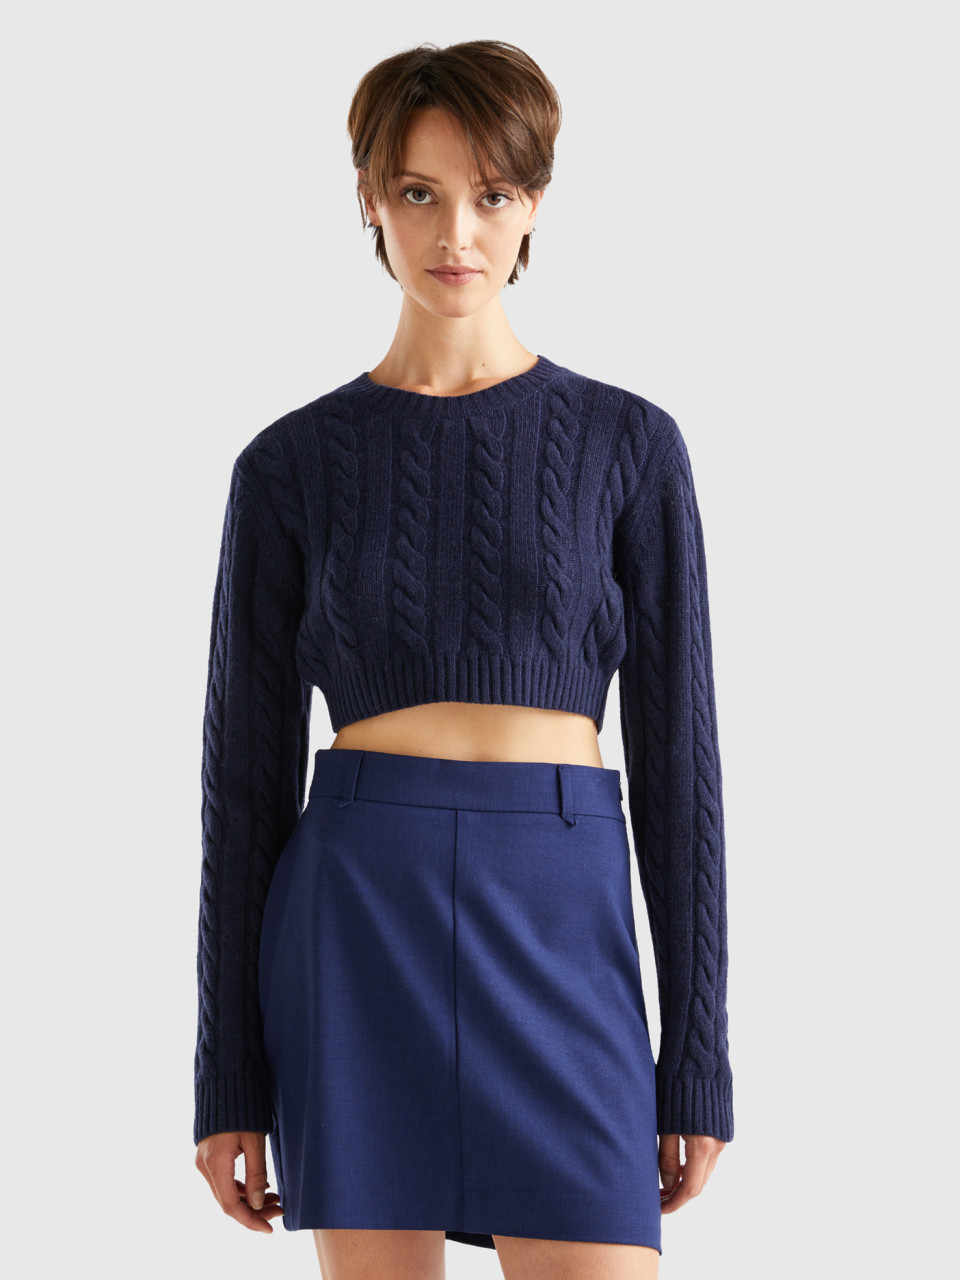 Benetton, Cropped Sweater With Cables, Dark Blue, Women